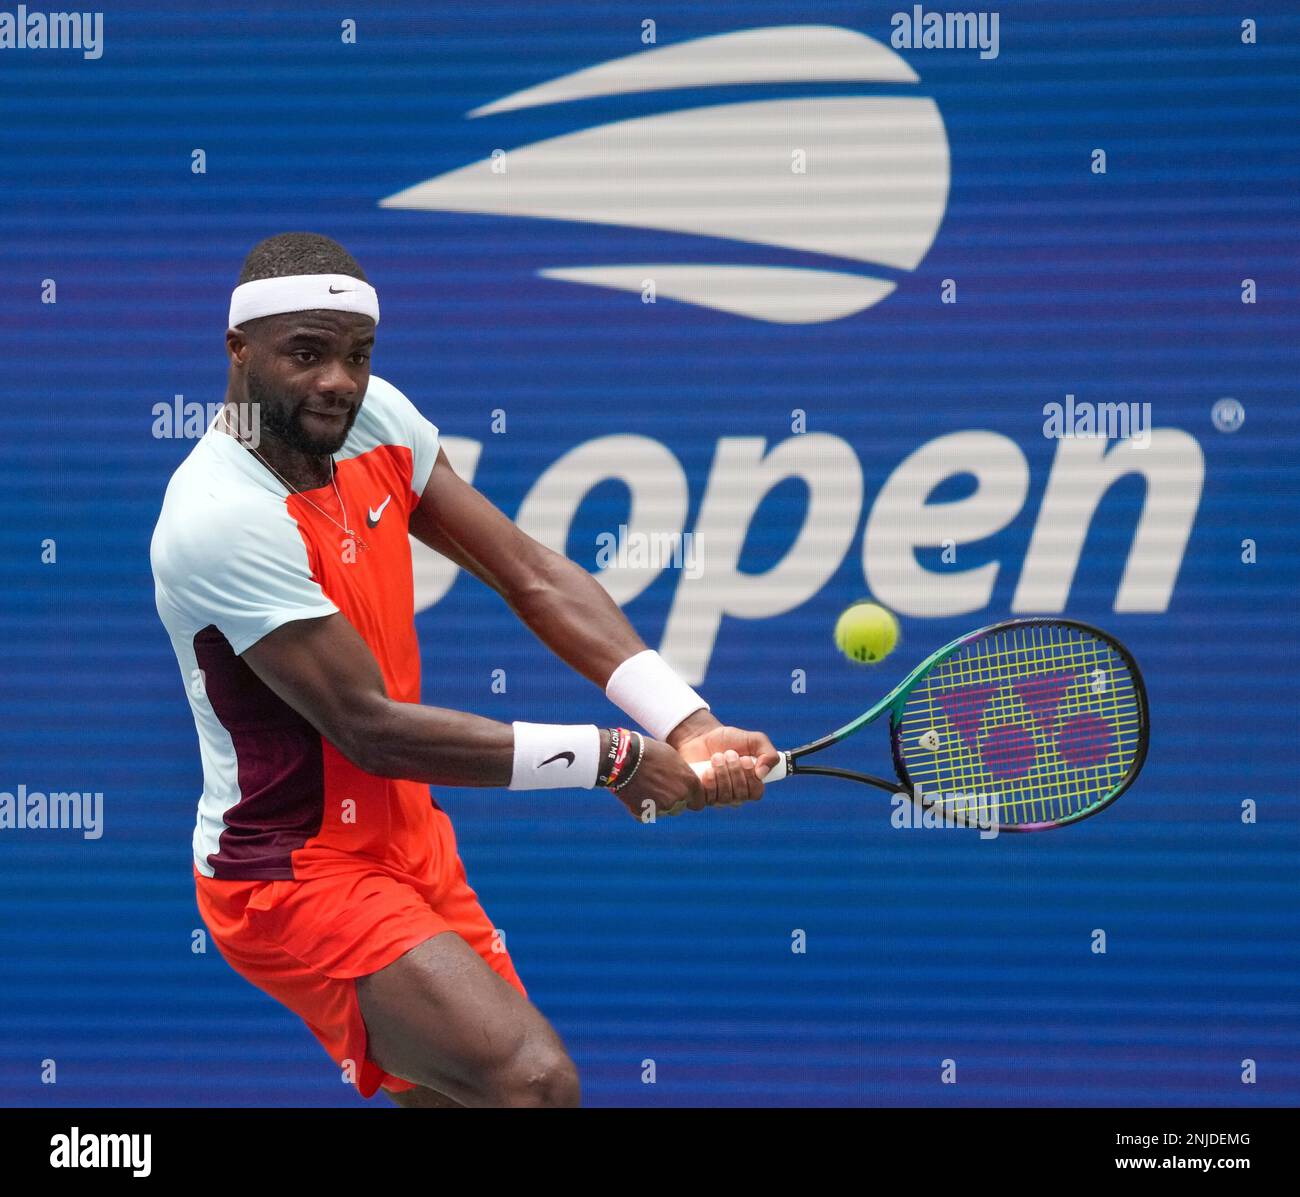 September 5, 2022 Frances Tiafoe (USA) defeated Rafael Nadal (ESP) 6-4, 4-6, 6-3, at the US Open being played at Billie Jean King Ntional Tennis Center in Flushing, Queens, New York /